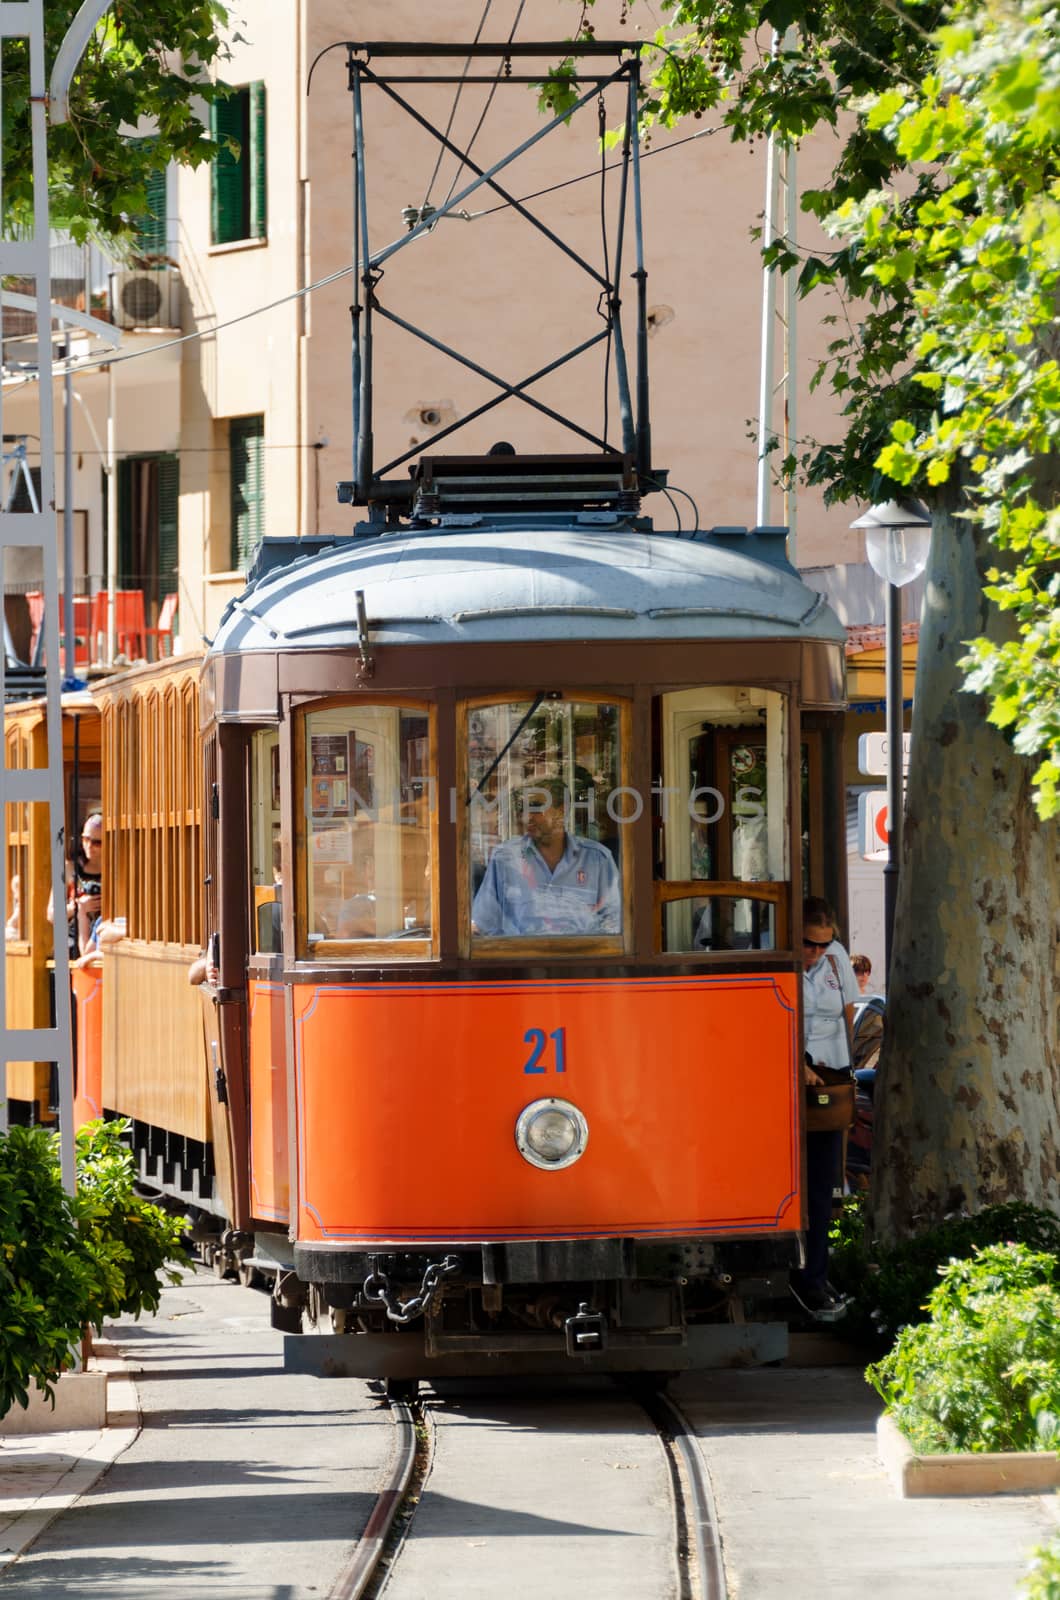 The tramway connecting the town to Soller by Nanisimova